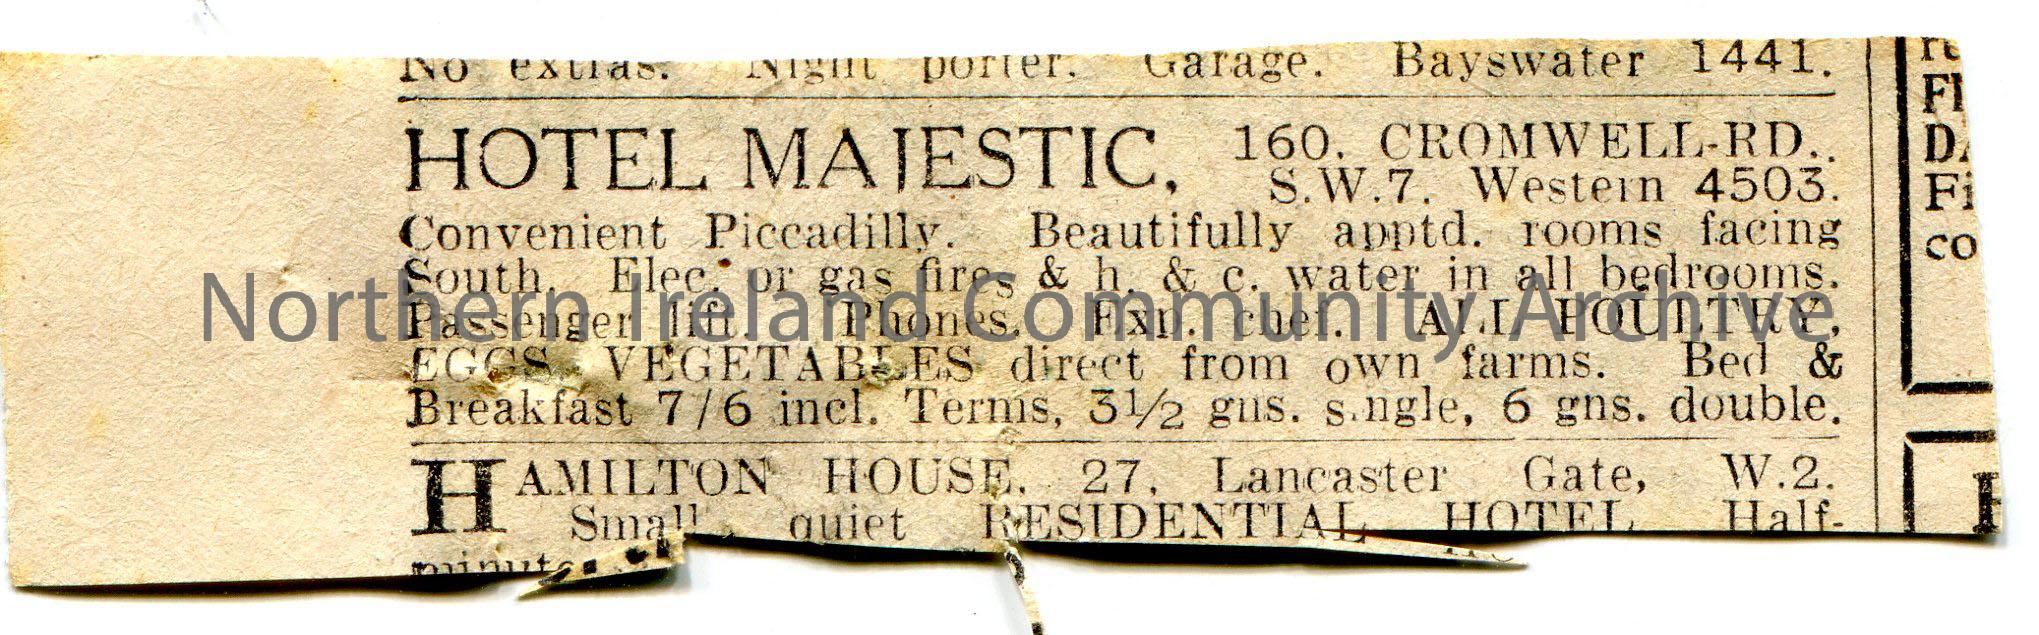 Advertisement cut out of newspaper for a hotel in London, Hotel Majestic, 160 Cromwell Road, S.W.7, near Piccadilly.